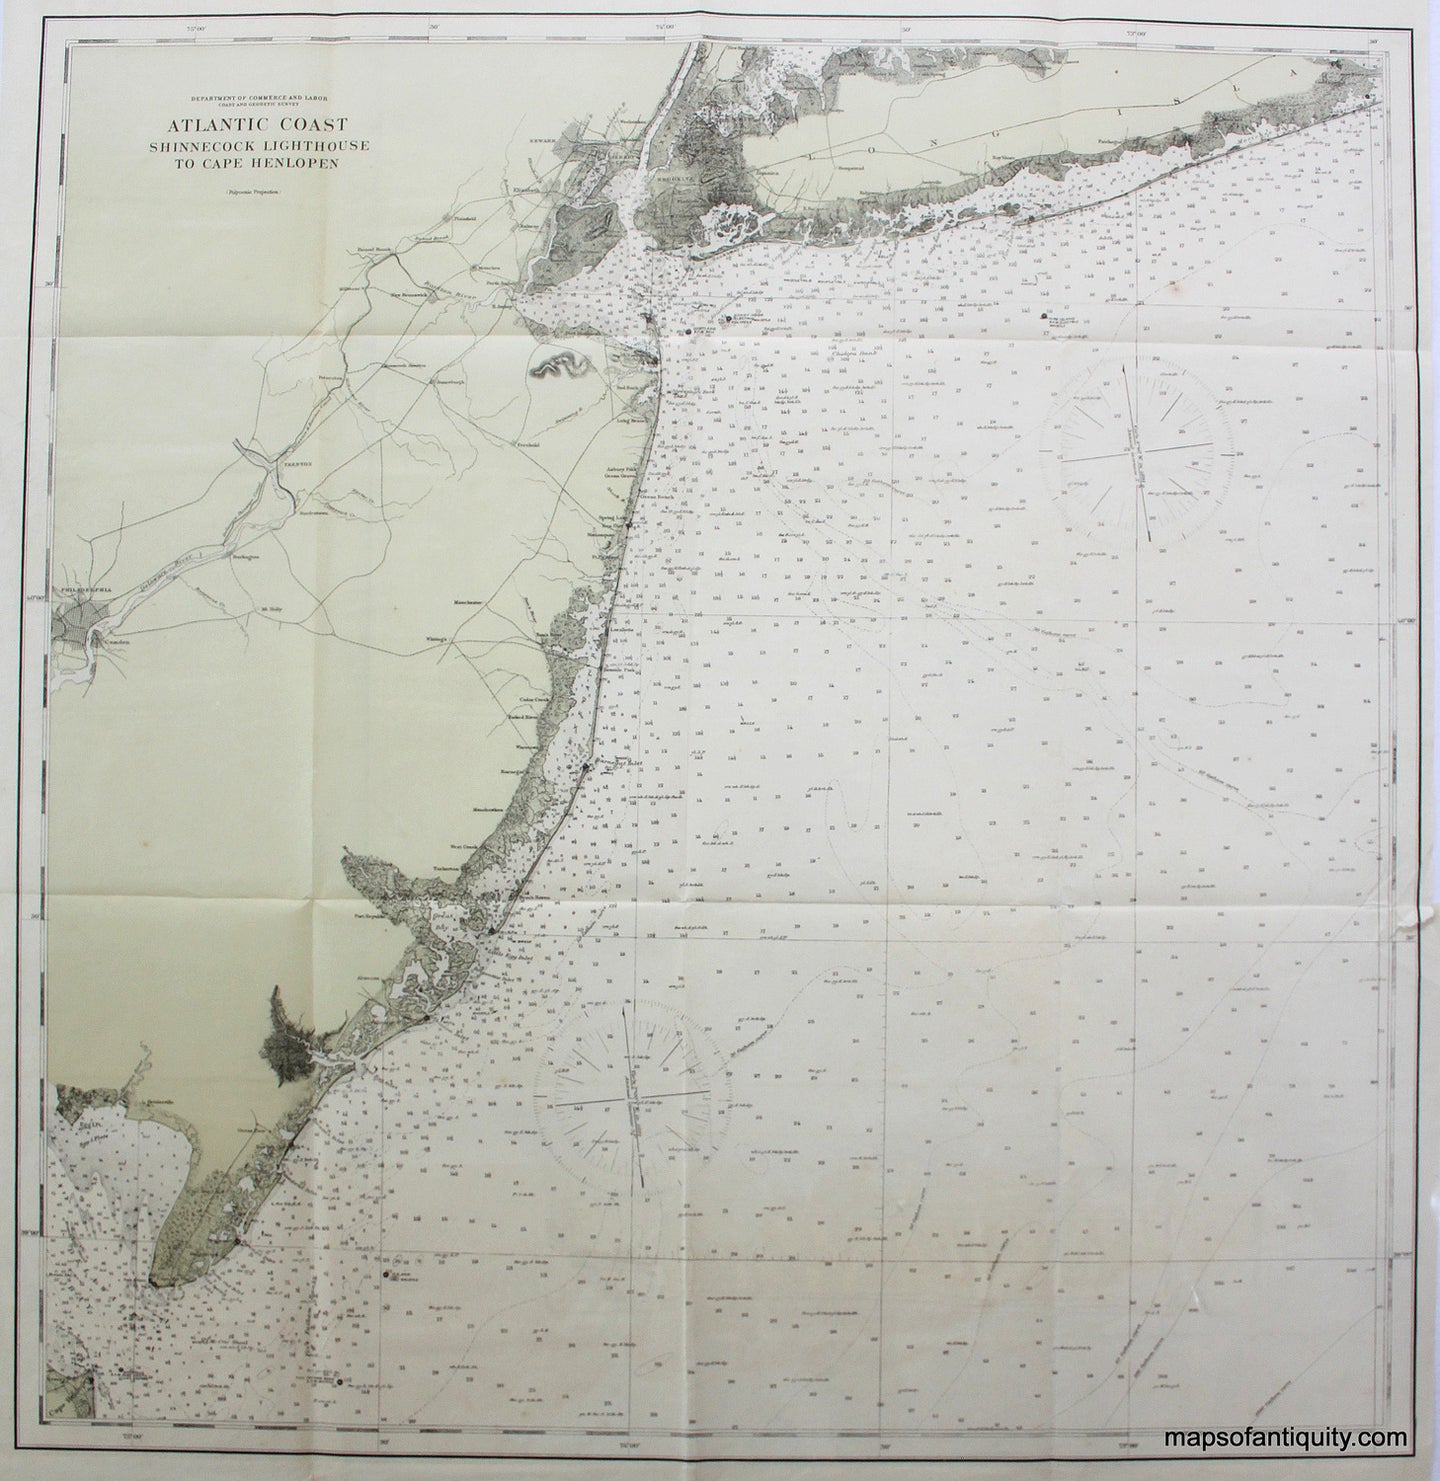 Printed-Color-Antique-Map-Atlantic-Coast-Shinnecock-Lighthouse-to-Cape-Henlopen-**********-United-States-Mid-Atlantic-1904-Department-of-Commerce-and-Labor-Coast-and-Geodetic-Survey-Maps-Of-Antiquity